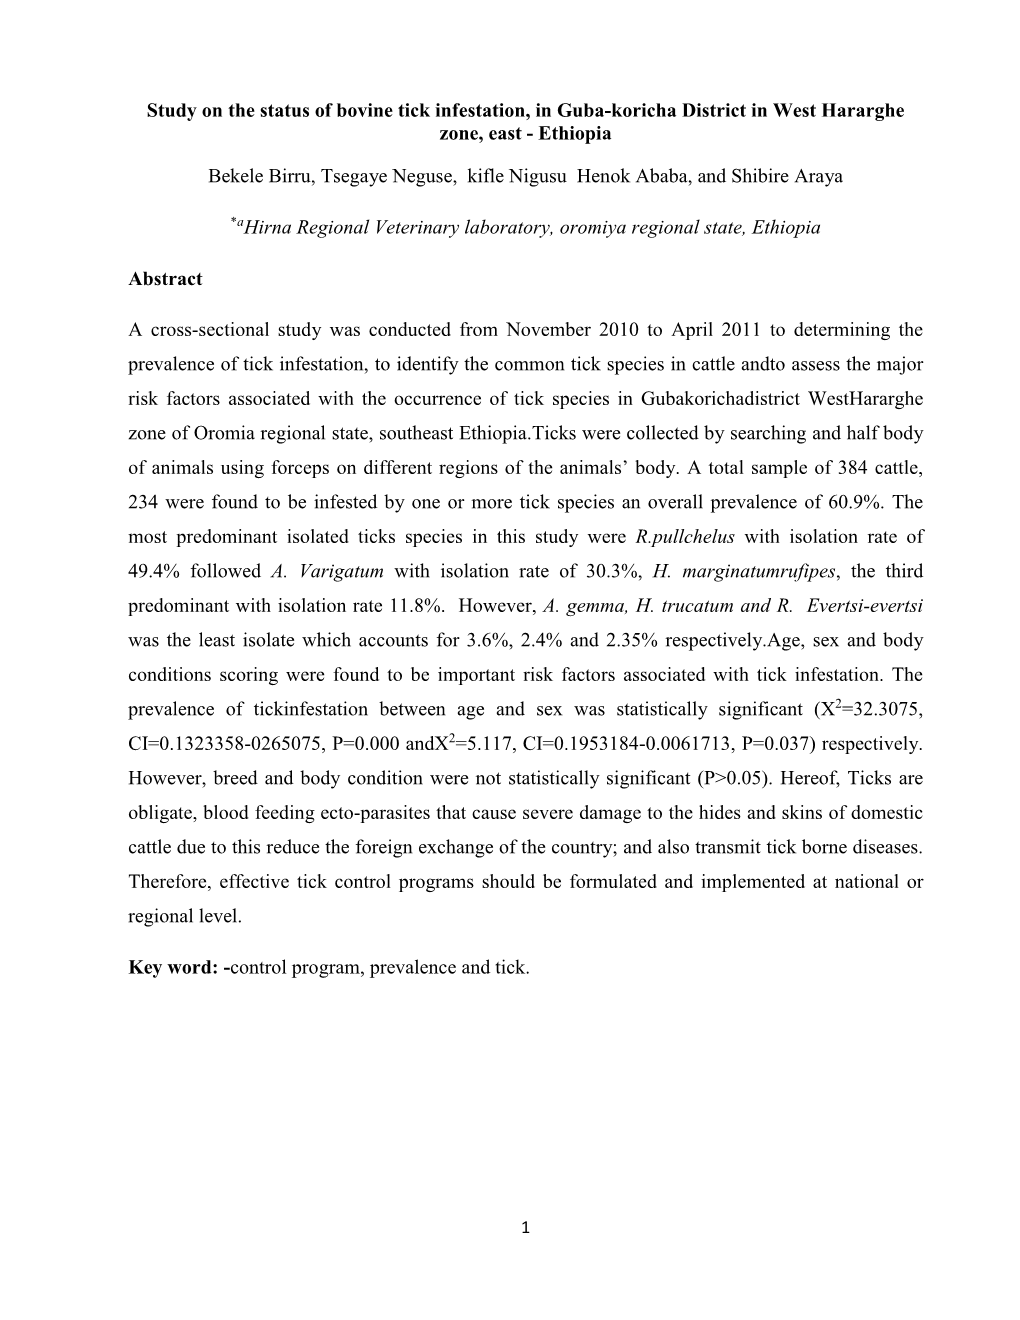 Study on the Status of Bovine Tick Infestation, in Guba-Koricha District in West Hararghe Zone, East - Ethiopia